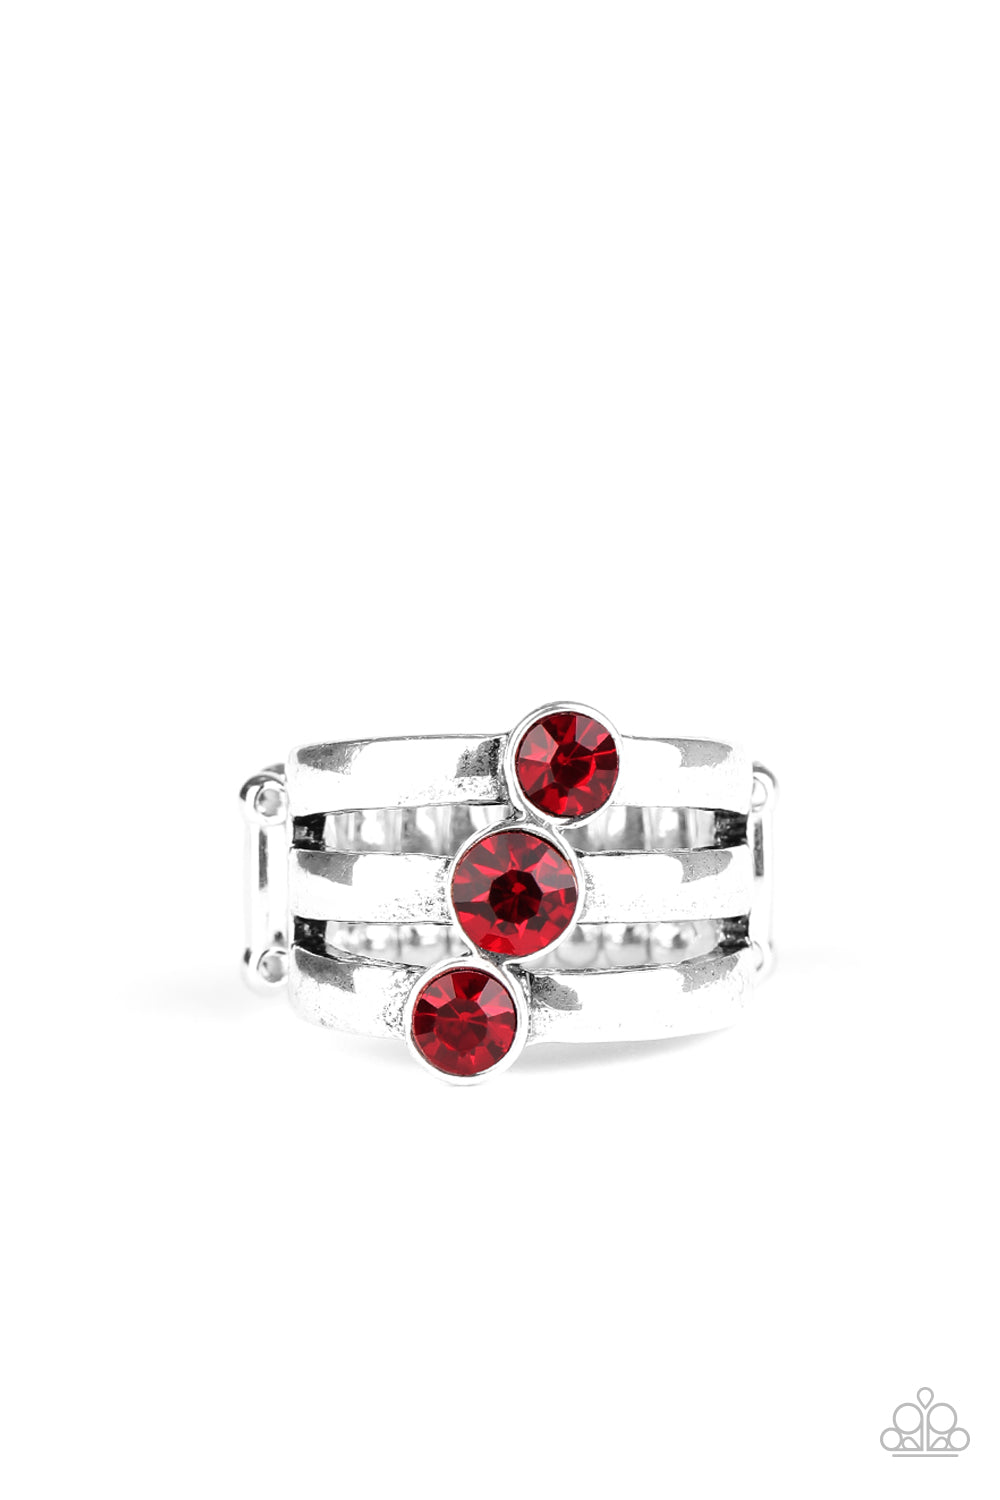 Paparazzi Triple The Twinkle - Red Rhinestones - Ring - $5 Jewelry with Ashley Swint